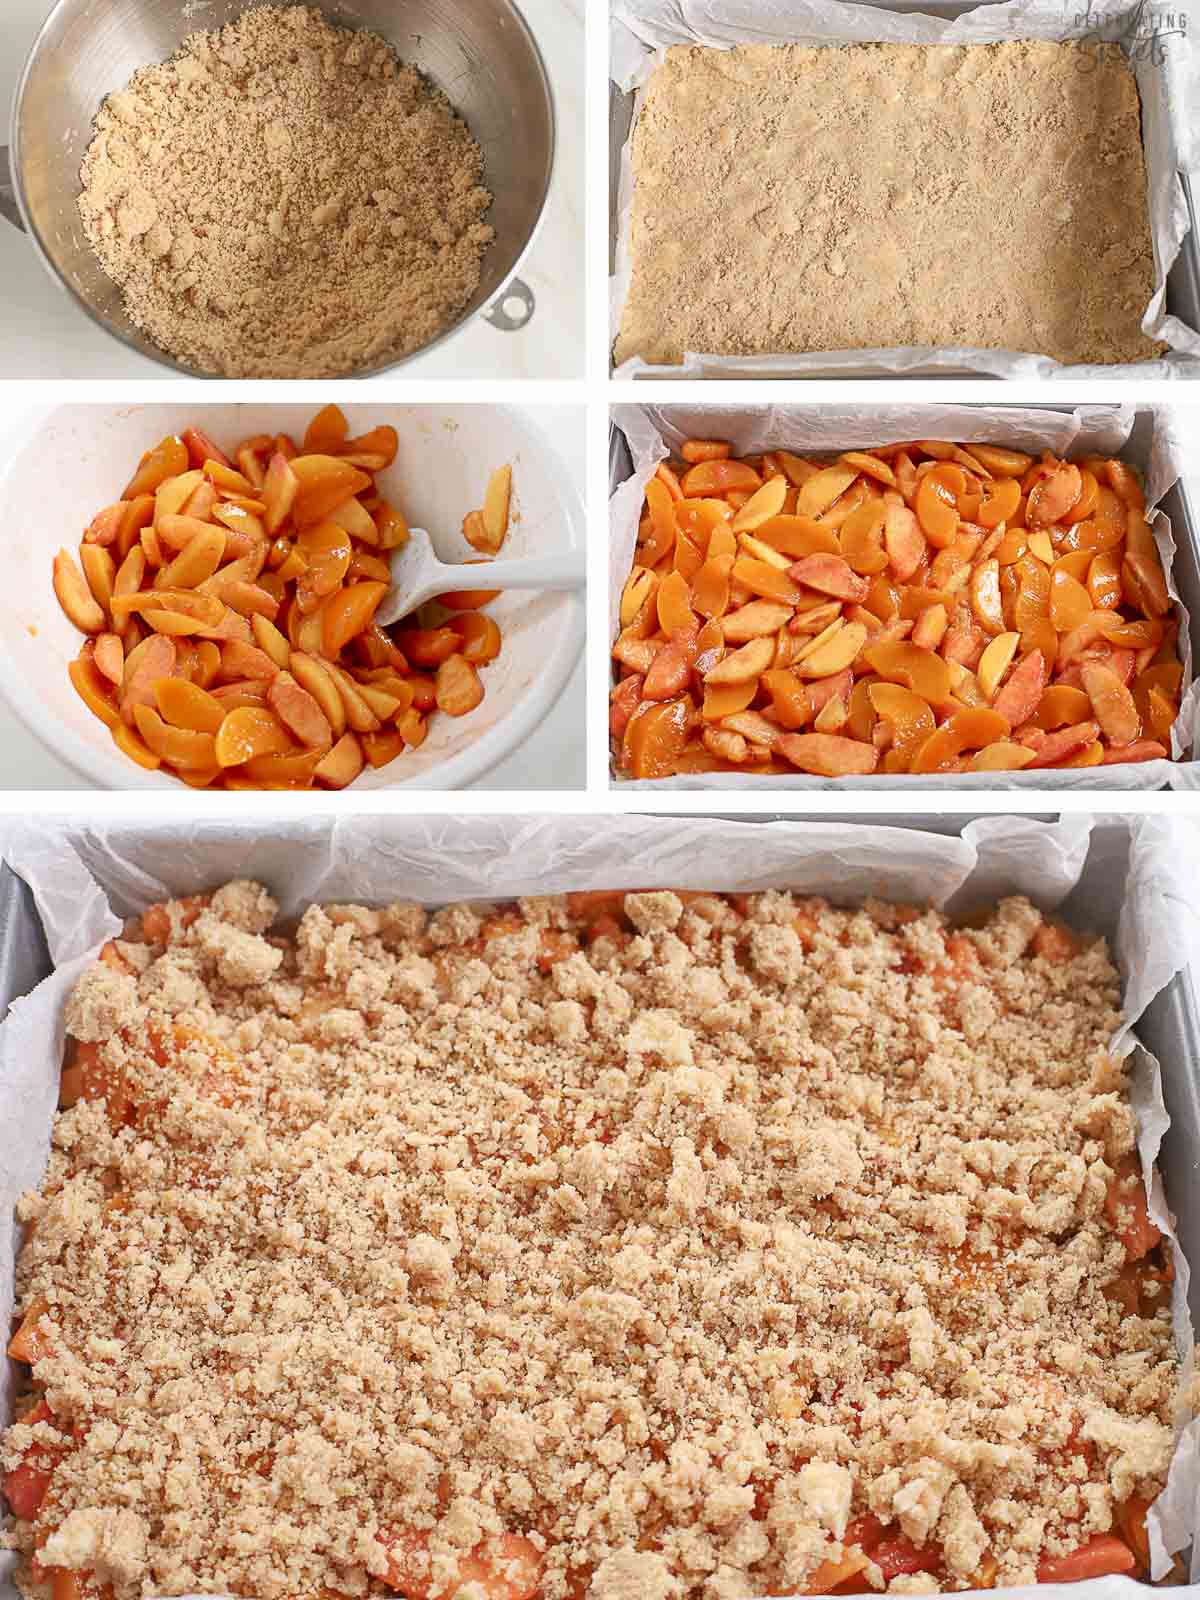 Step by step collage of how to make peach bars: crust and sliced peach filling in a rectangular baking pan.